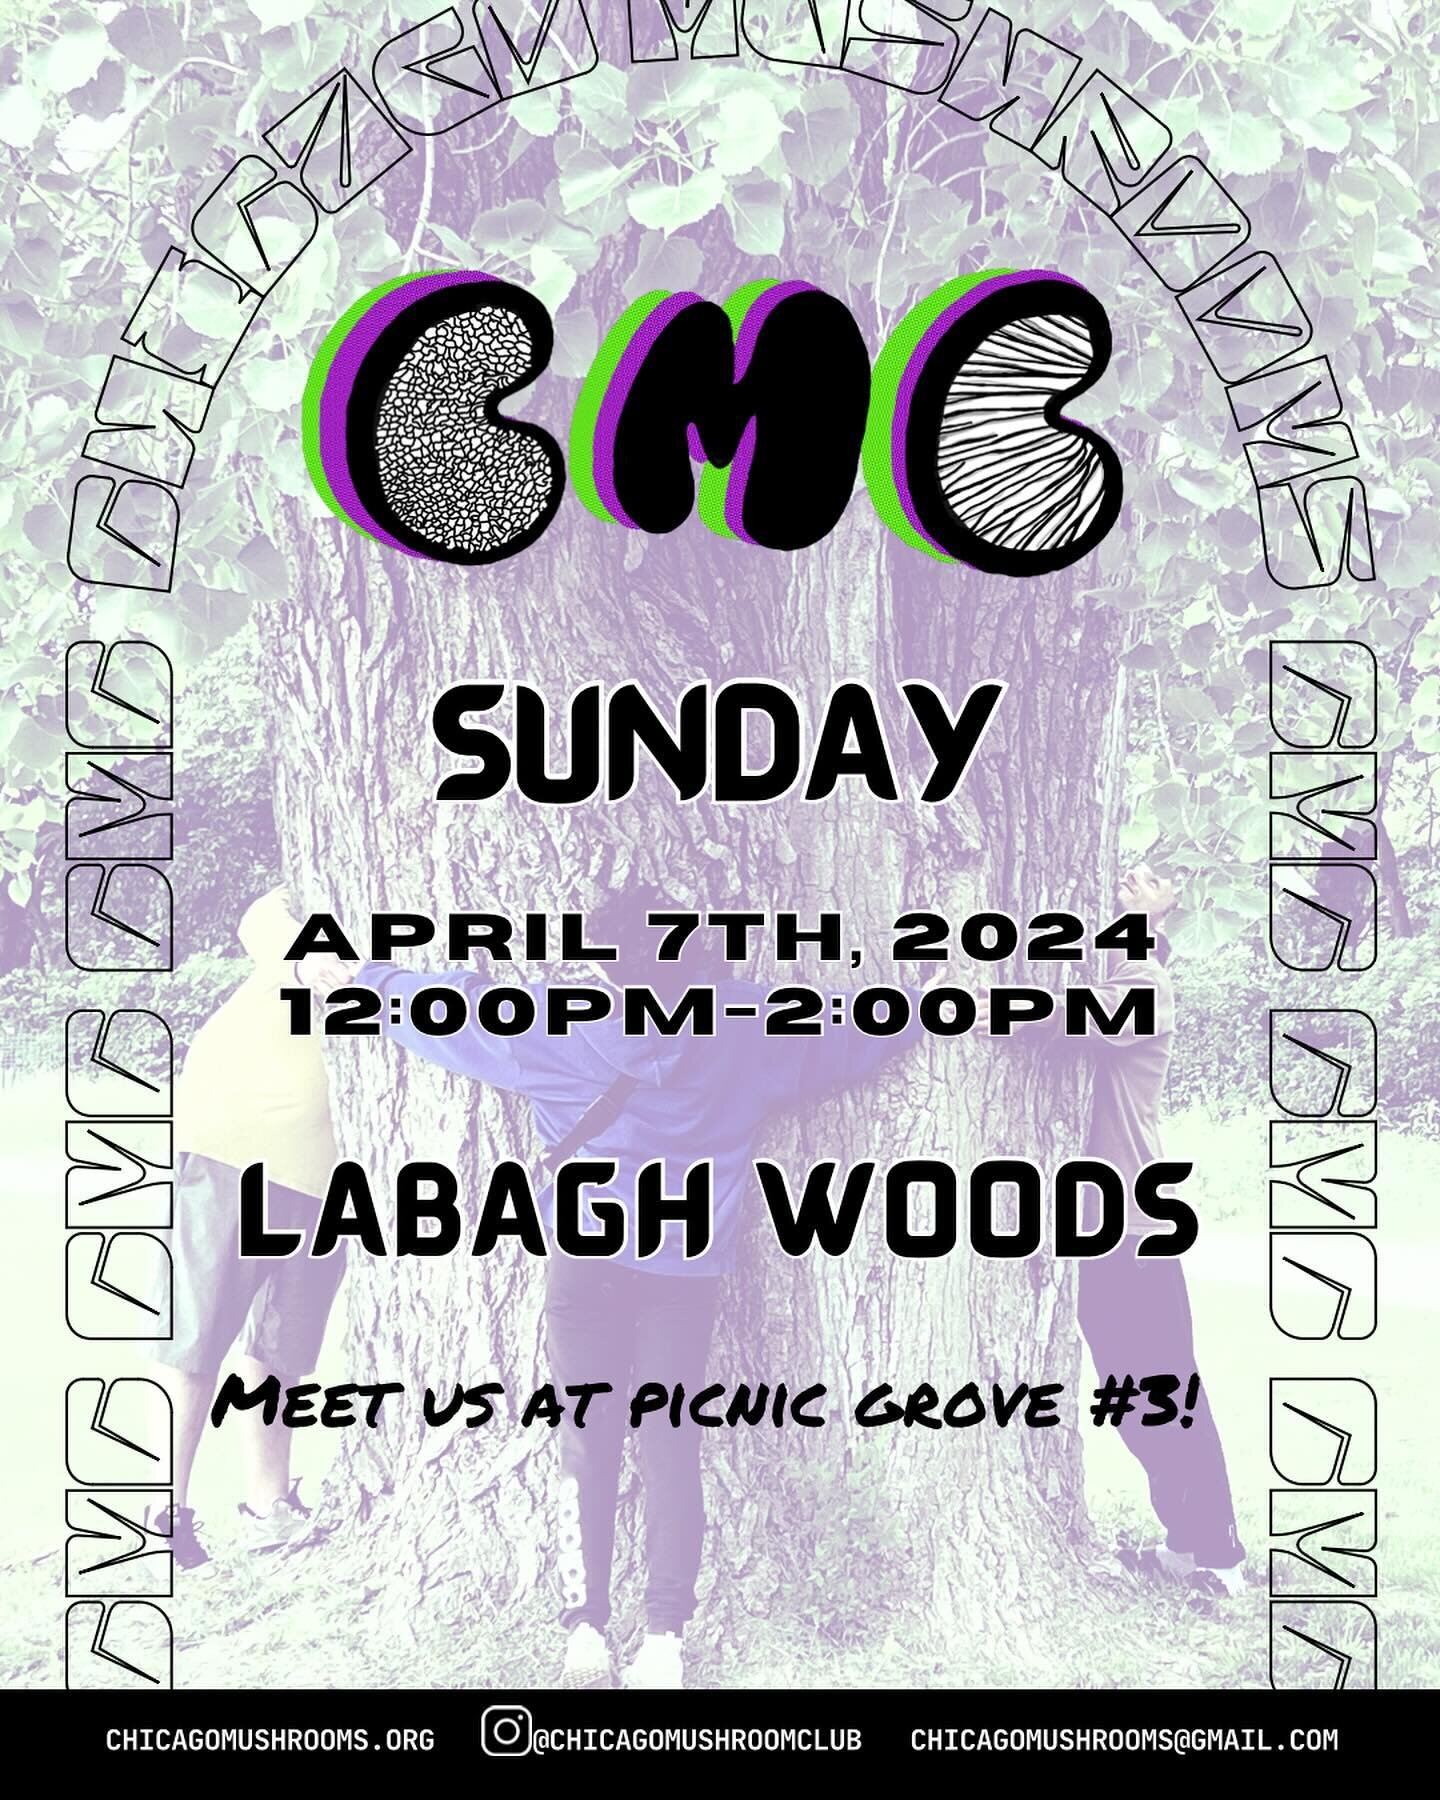 ✨🍄🍄&zwj;🟫🍄🍄&zwj;🟫✨ It&rsquo;s time for another outing and spring has certainly sprung! Sunday April 7th at noon, we&rsquo;ll see you at LaBagh✨🍄🍄&zwj;🟫🍄🍄&zwj;🟫✨

Meet us at Picnic Grove #3! We will walk into the preserve together as a gro